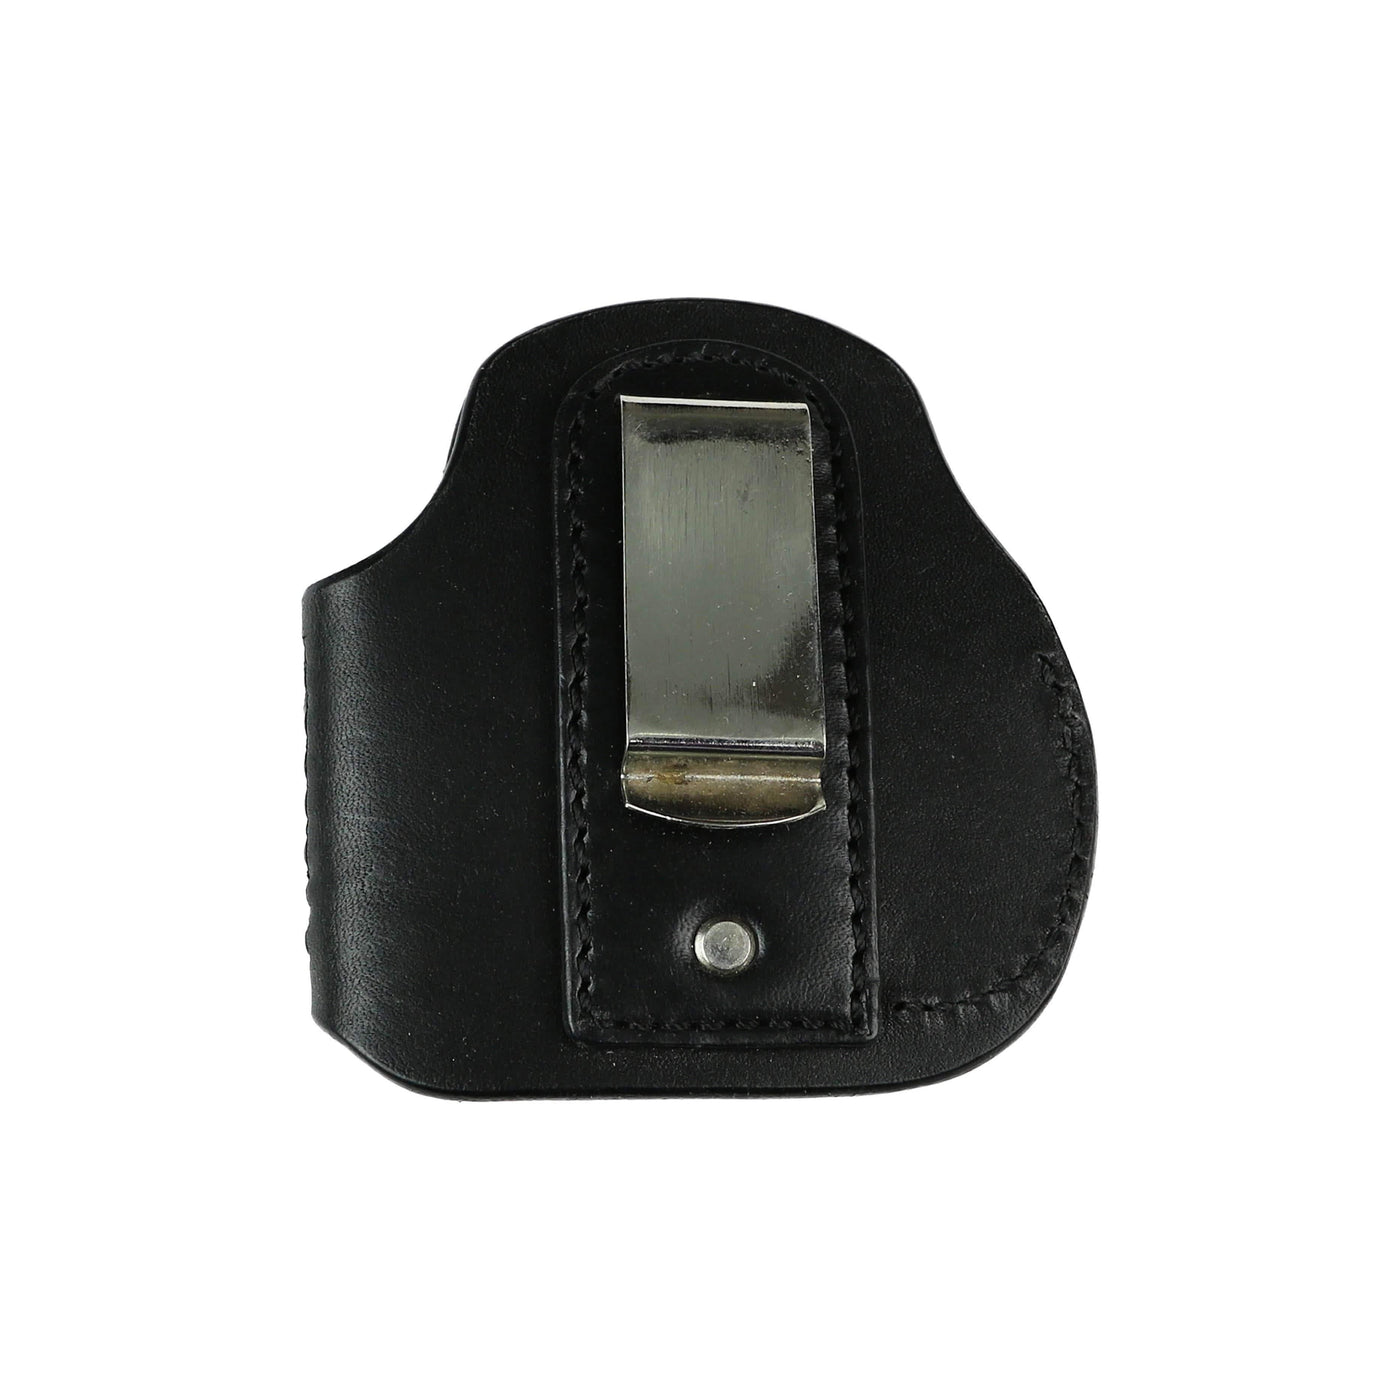 Unisex Compact Leather Clip-on Gun Holster by High Caliber Gun Accessories